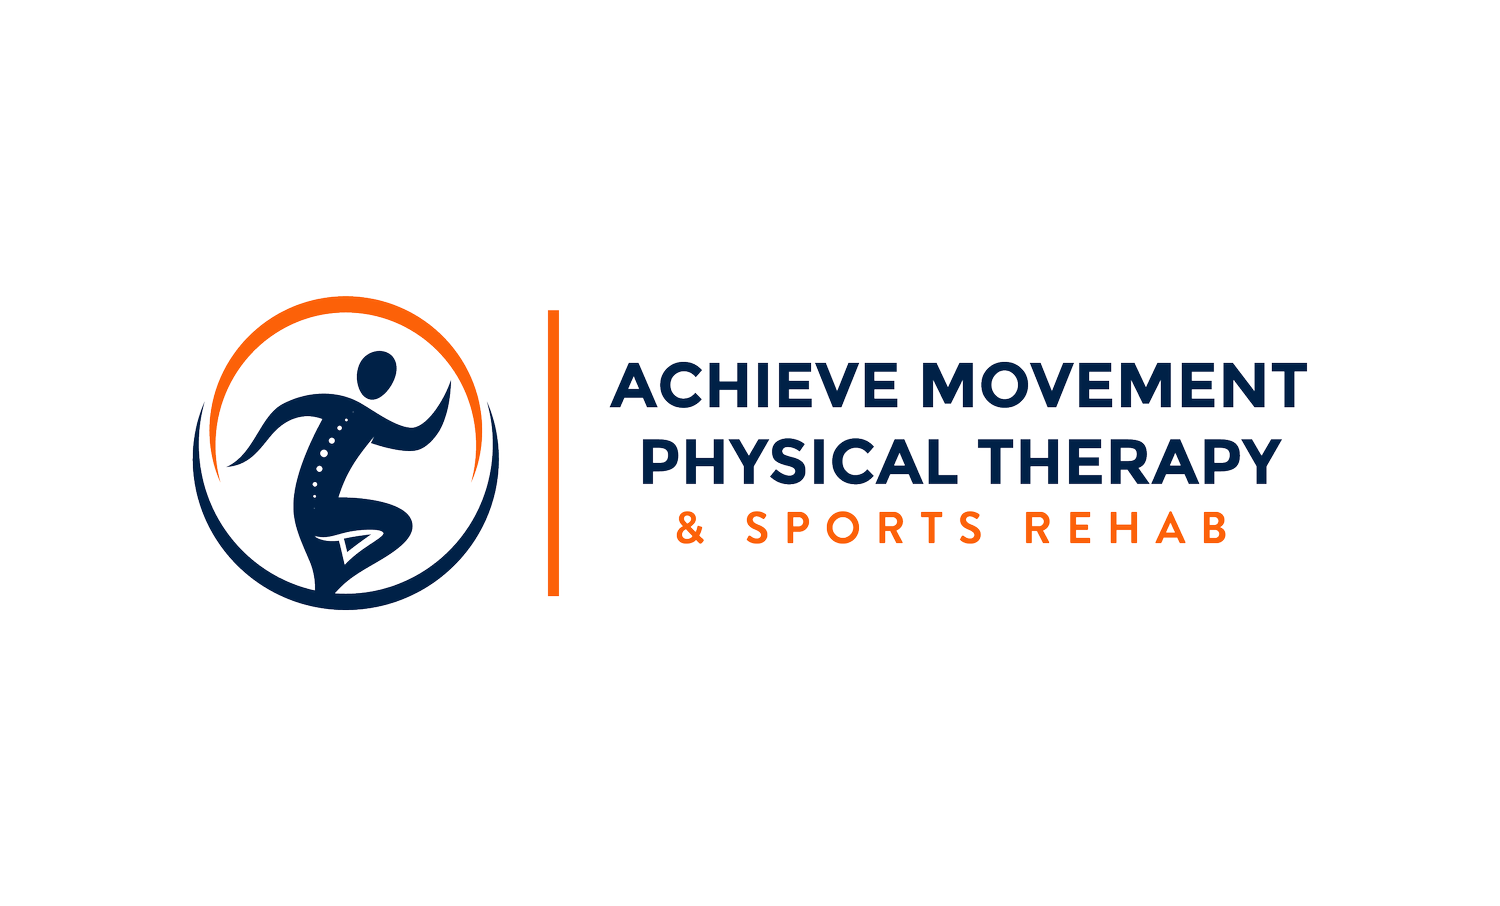 Achieve Movement Physical Therapy